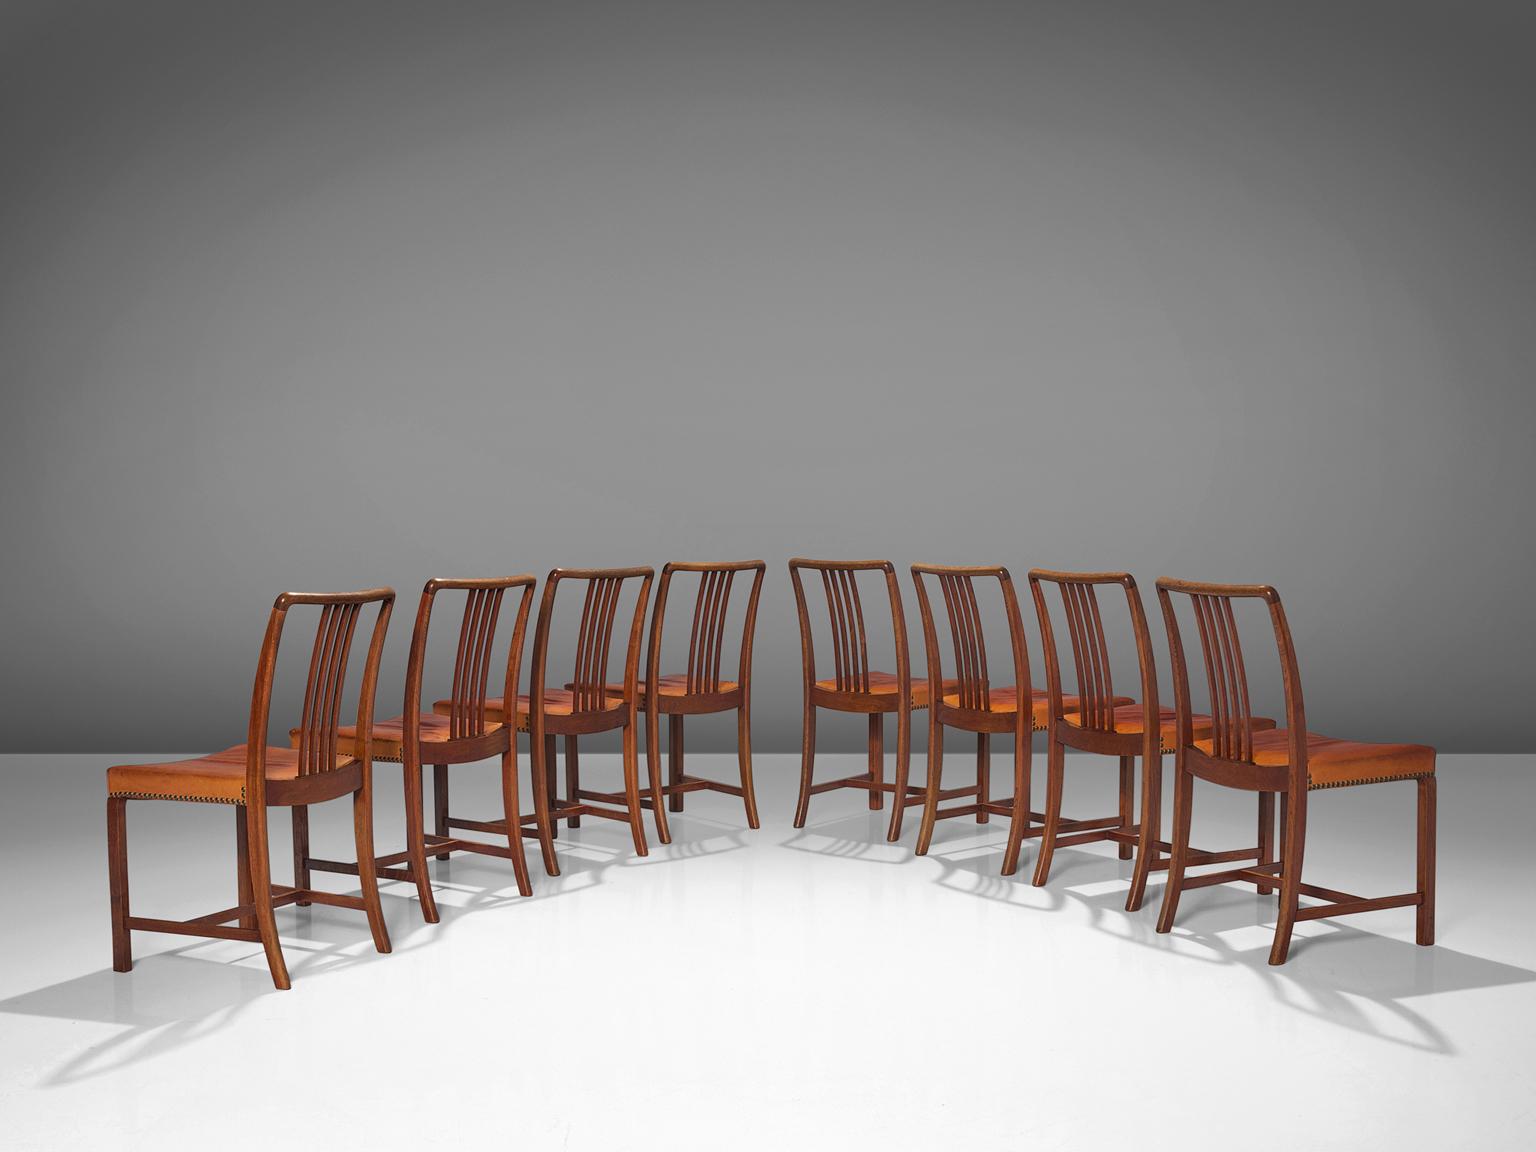 Jørgen Christensen, set of eight dining chairs, leather, oak, brass, Denmark, 1950s 

Exclusive set of eight dining chairs designed by Danish designer and cabinetmaker Jørgen Christensen. The seats are upholstered with patinated natural leather and